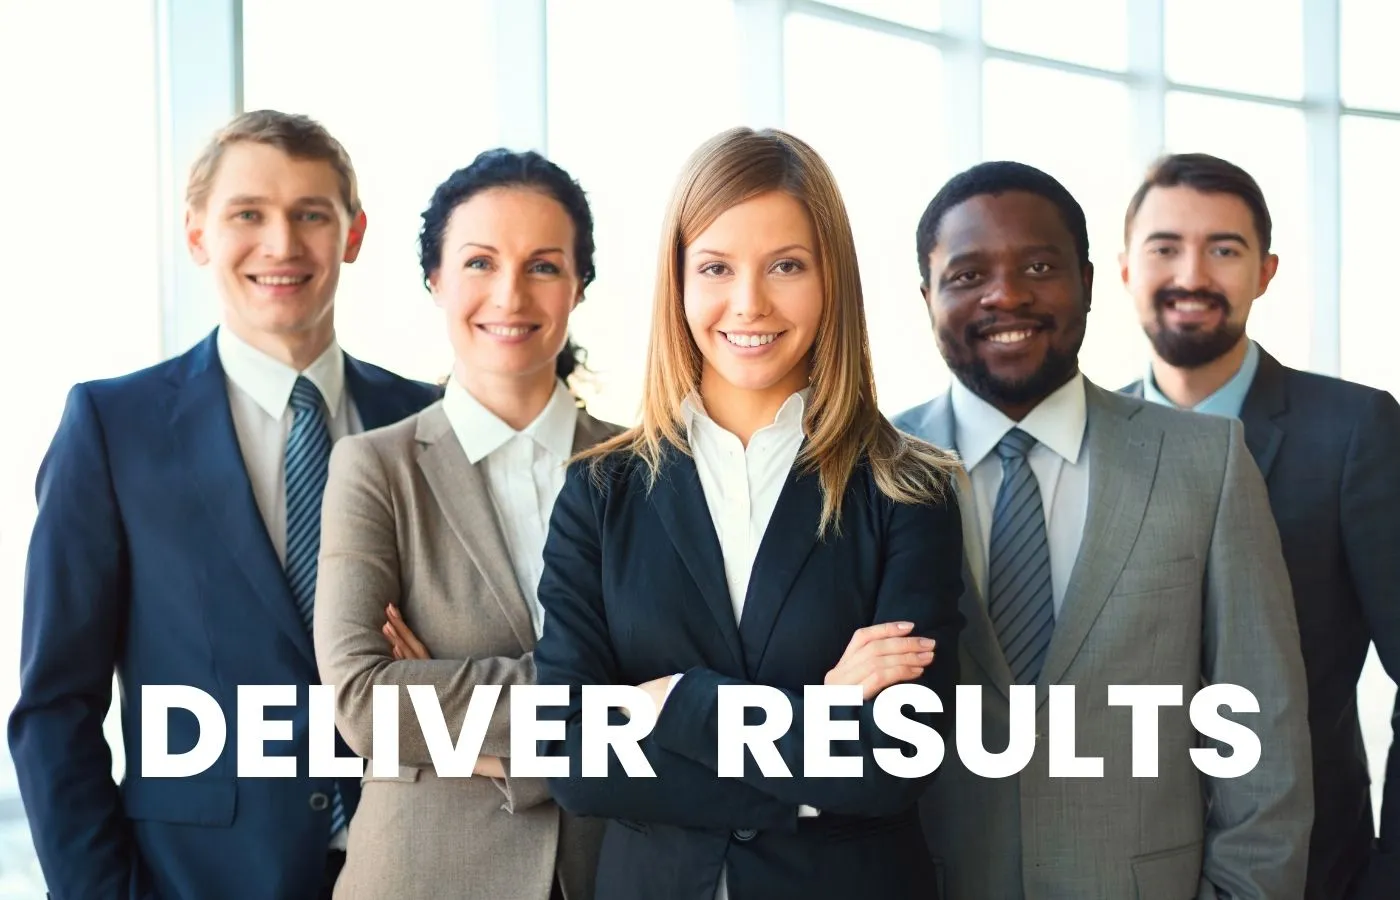 Deliver Results - Related Questions